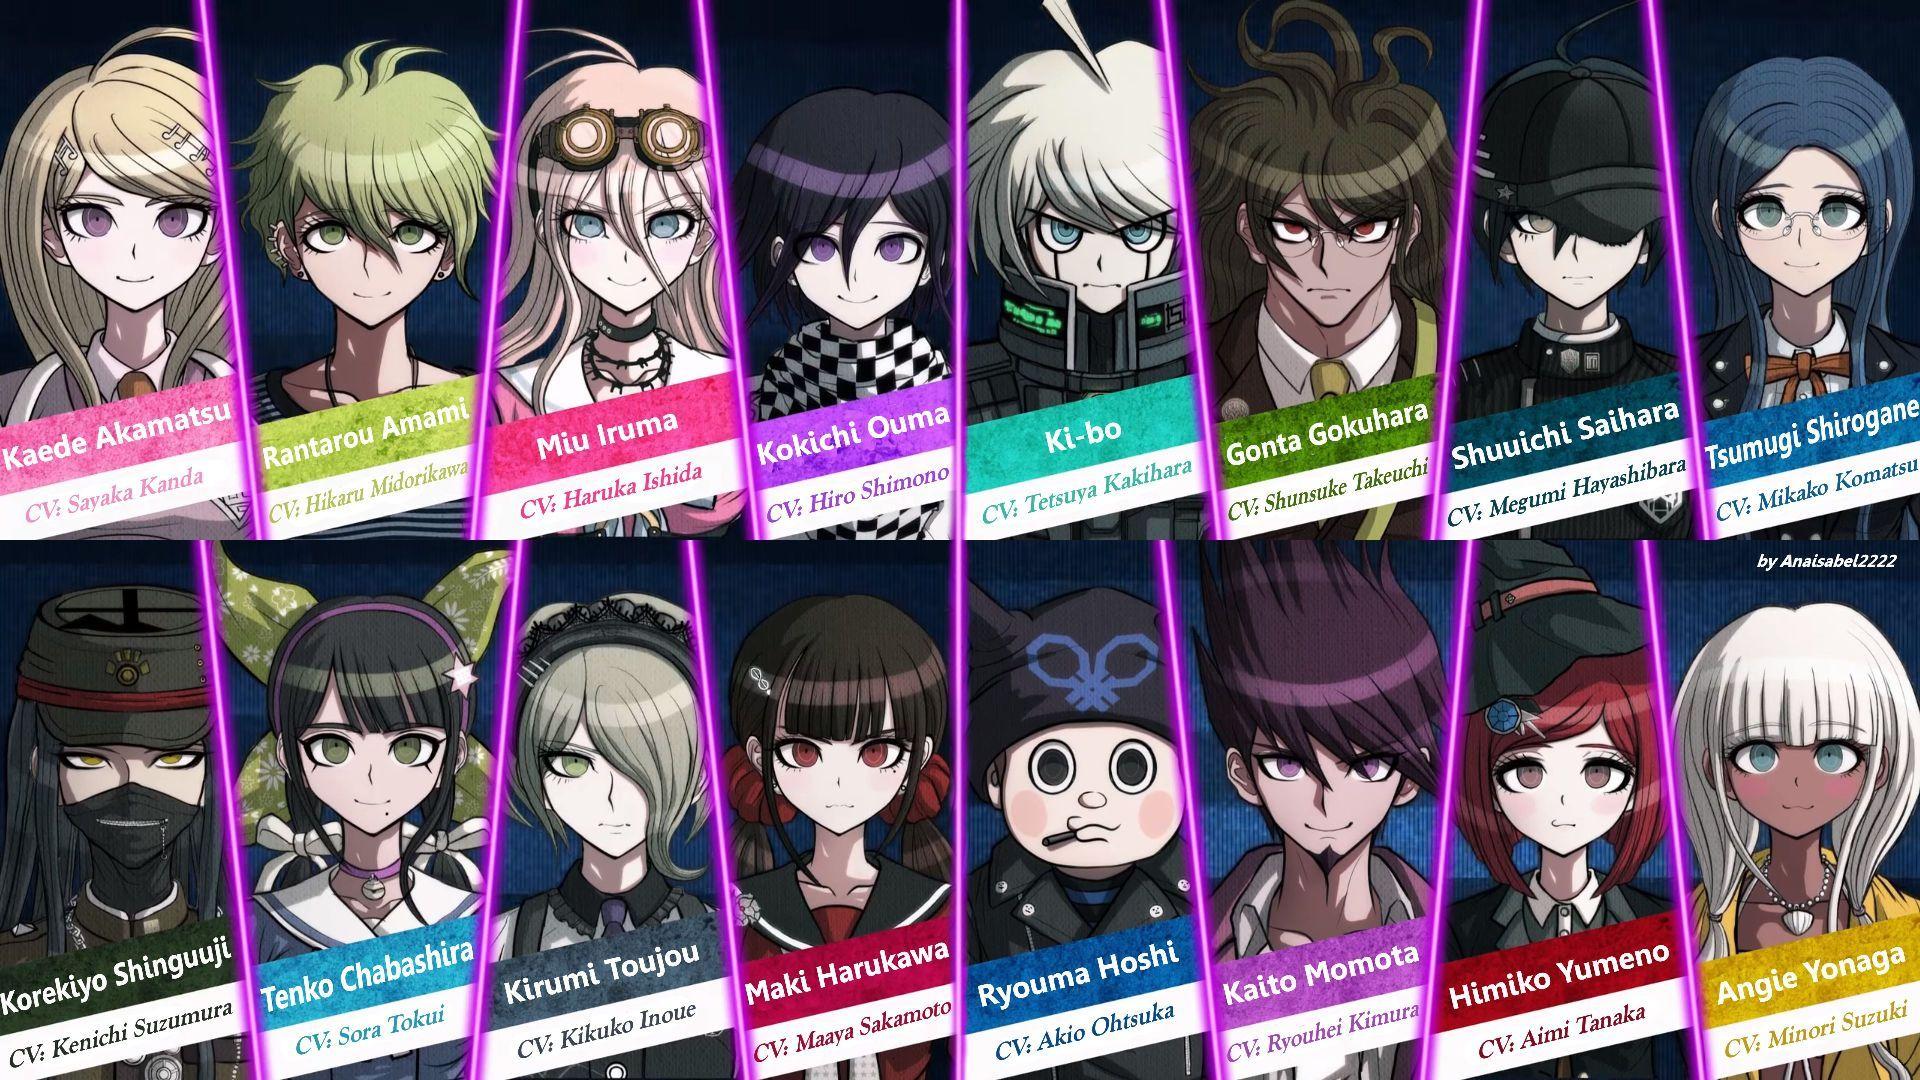 NDRV3 HQ Wallpaper using the sprites provided by the new trailer